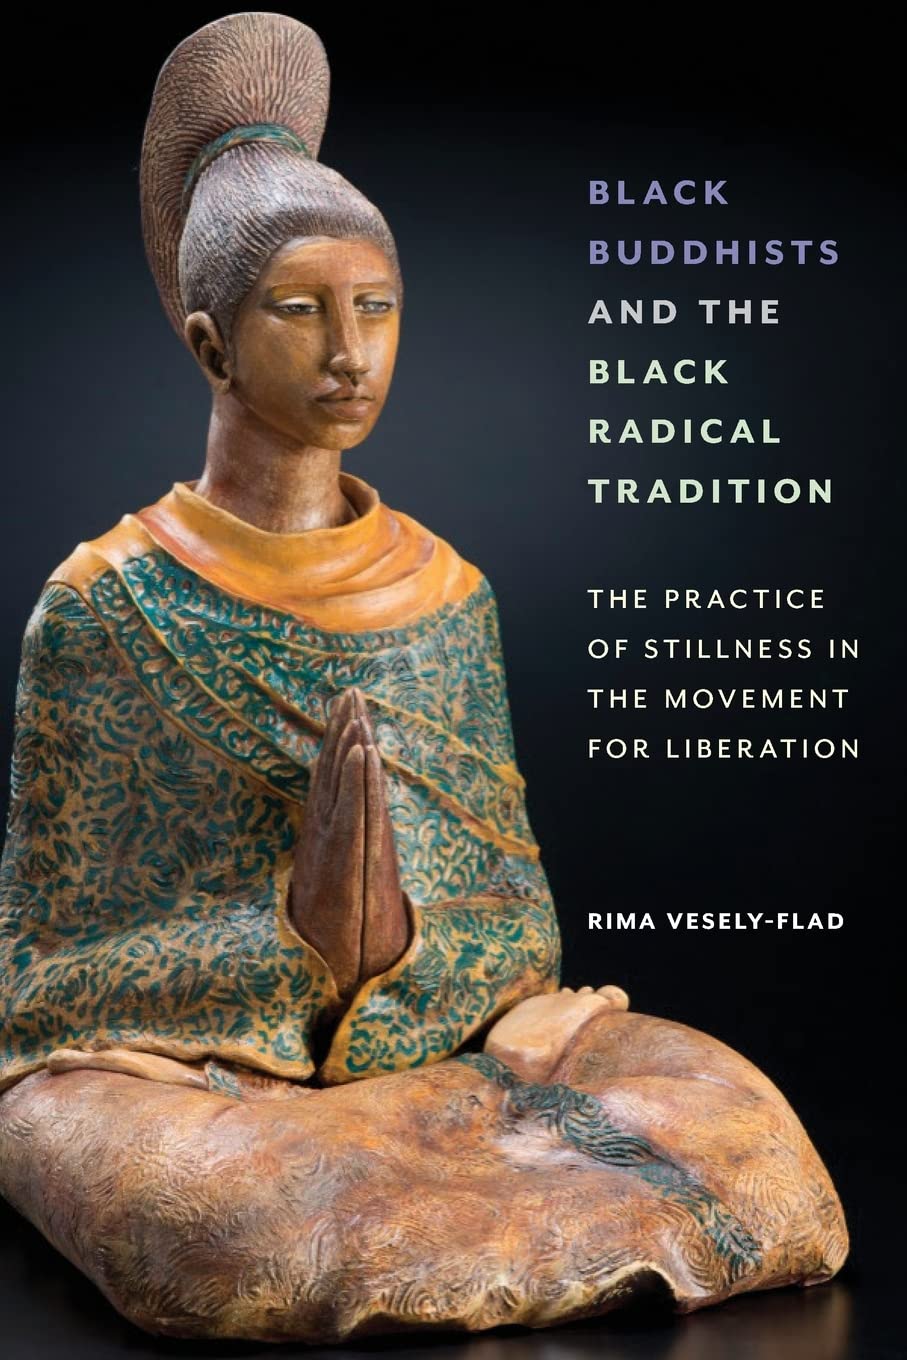 Black Buddhists and the Black Radical Tradition